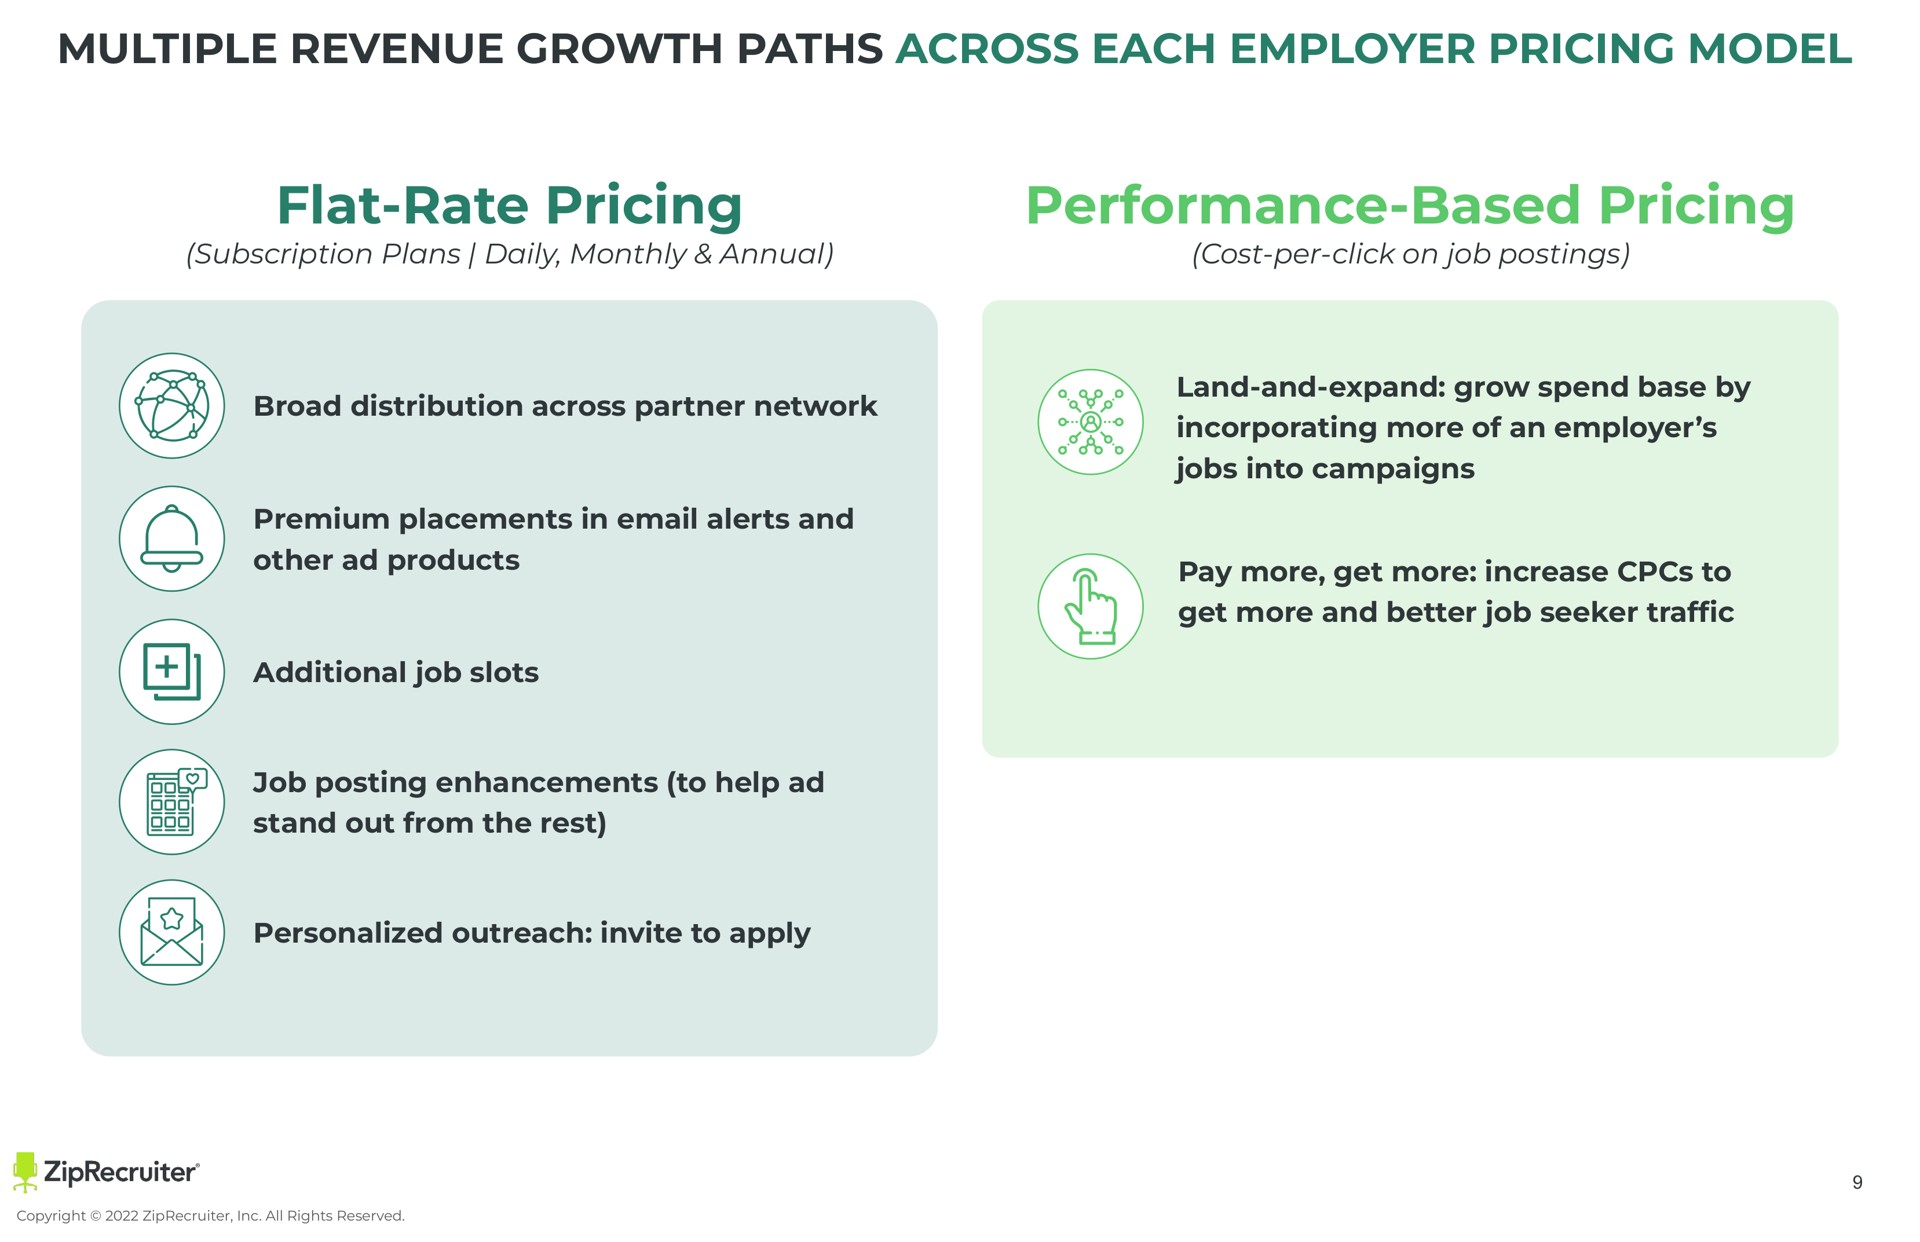 multiple revenue growth paths across each employer pricing model flat rate pricing subscription plans daily monthly annual performance based pricing cost per click on job postings land and expand grow spend base by incorporating more of an employer jobs into campaigns pay more get more increase to get more and better job seeker broad distribution across partner network premium placements in alerts and other products additional job slots job posting enhancements to help stand out from the rest personalized outreach invite to apply | ZipRecruiter